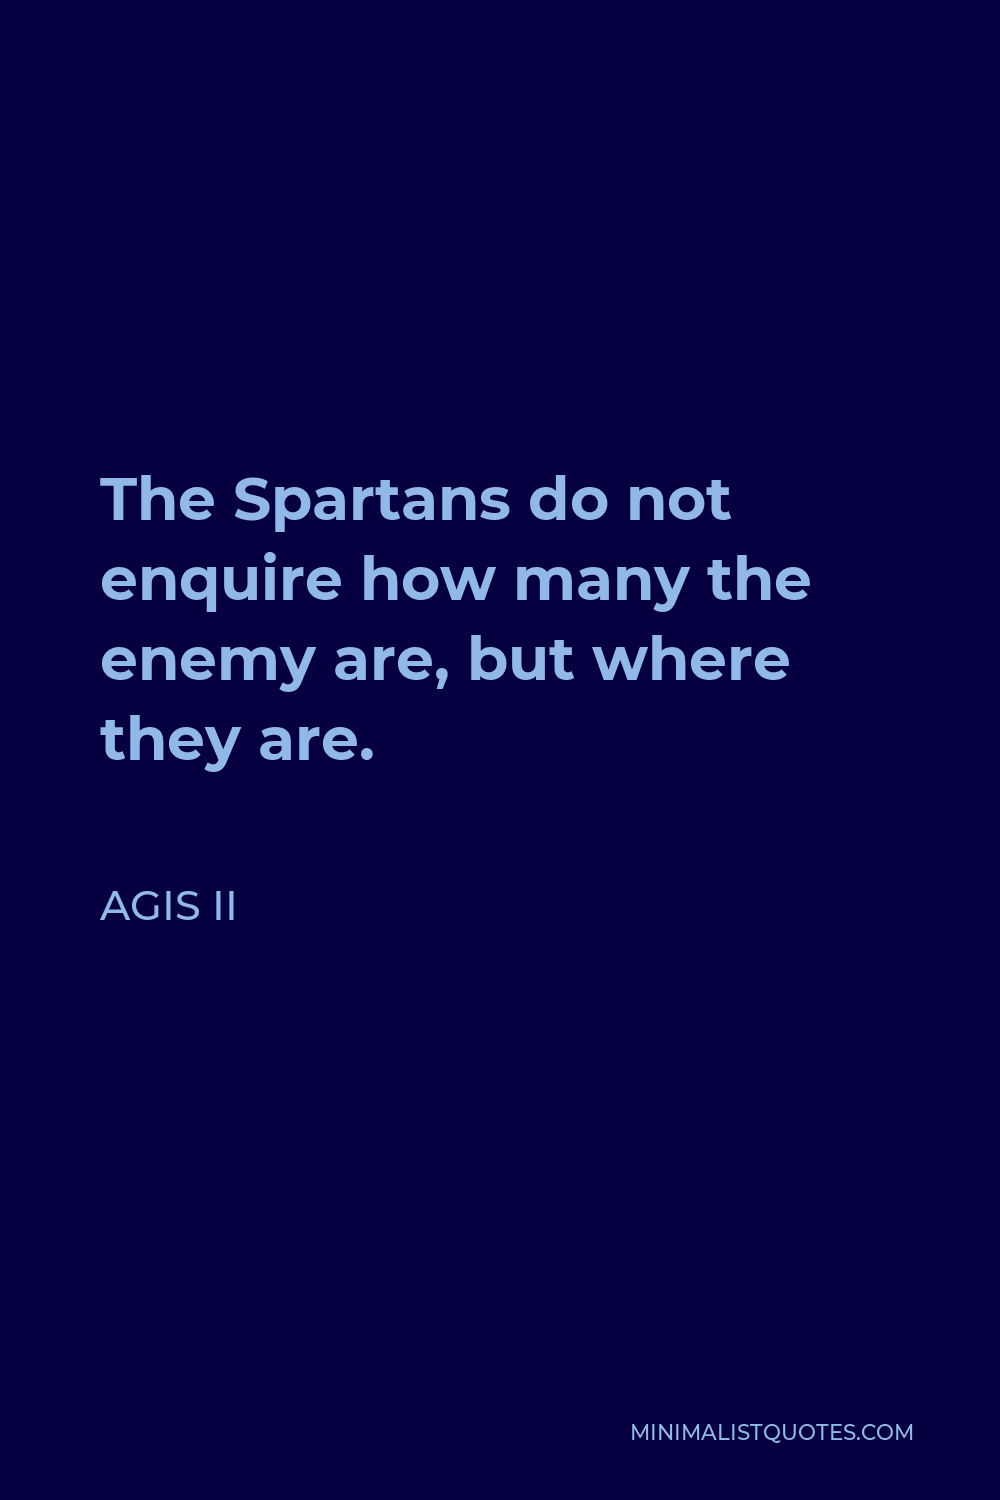 Agis II Quote - The Spartans do not enquire how many the enemy are, but where they are.